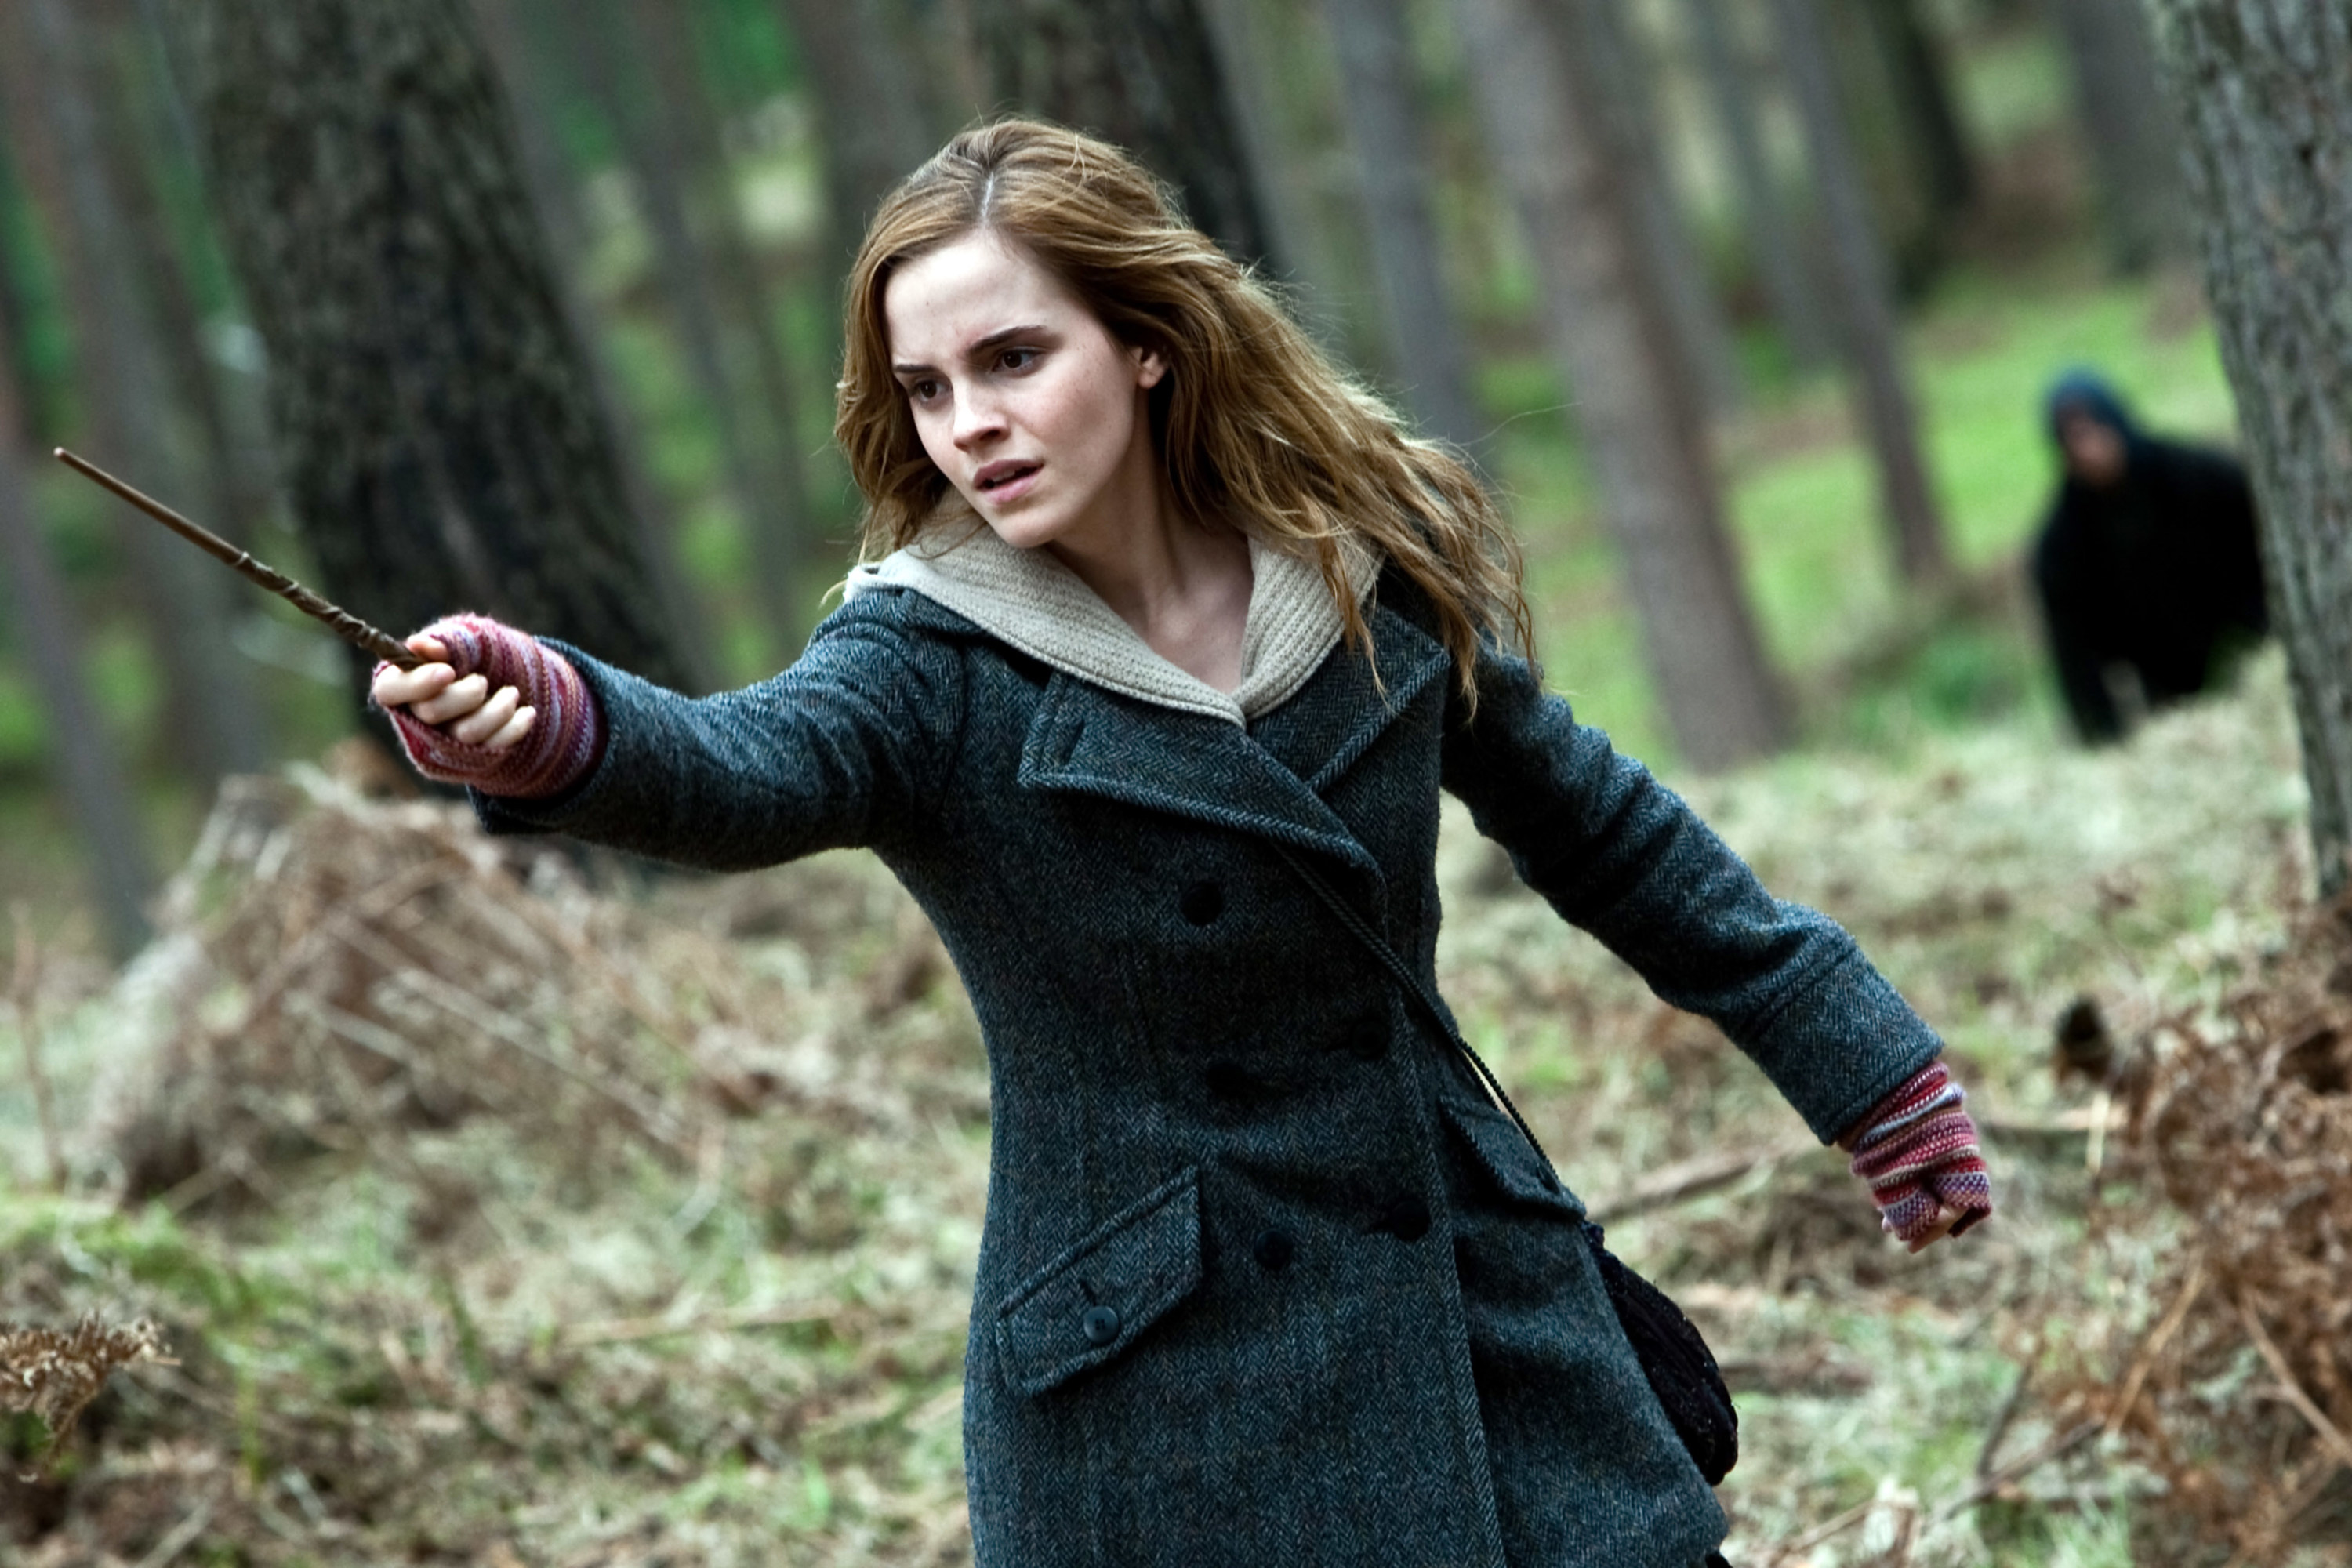 Hermione points her wand at someone in the woods